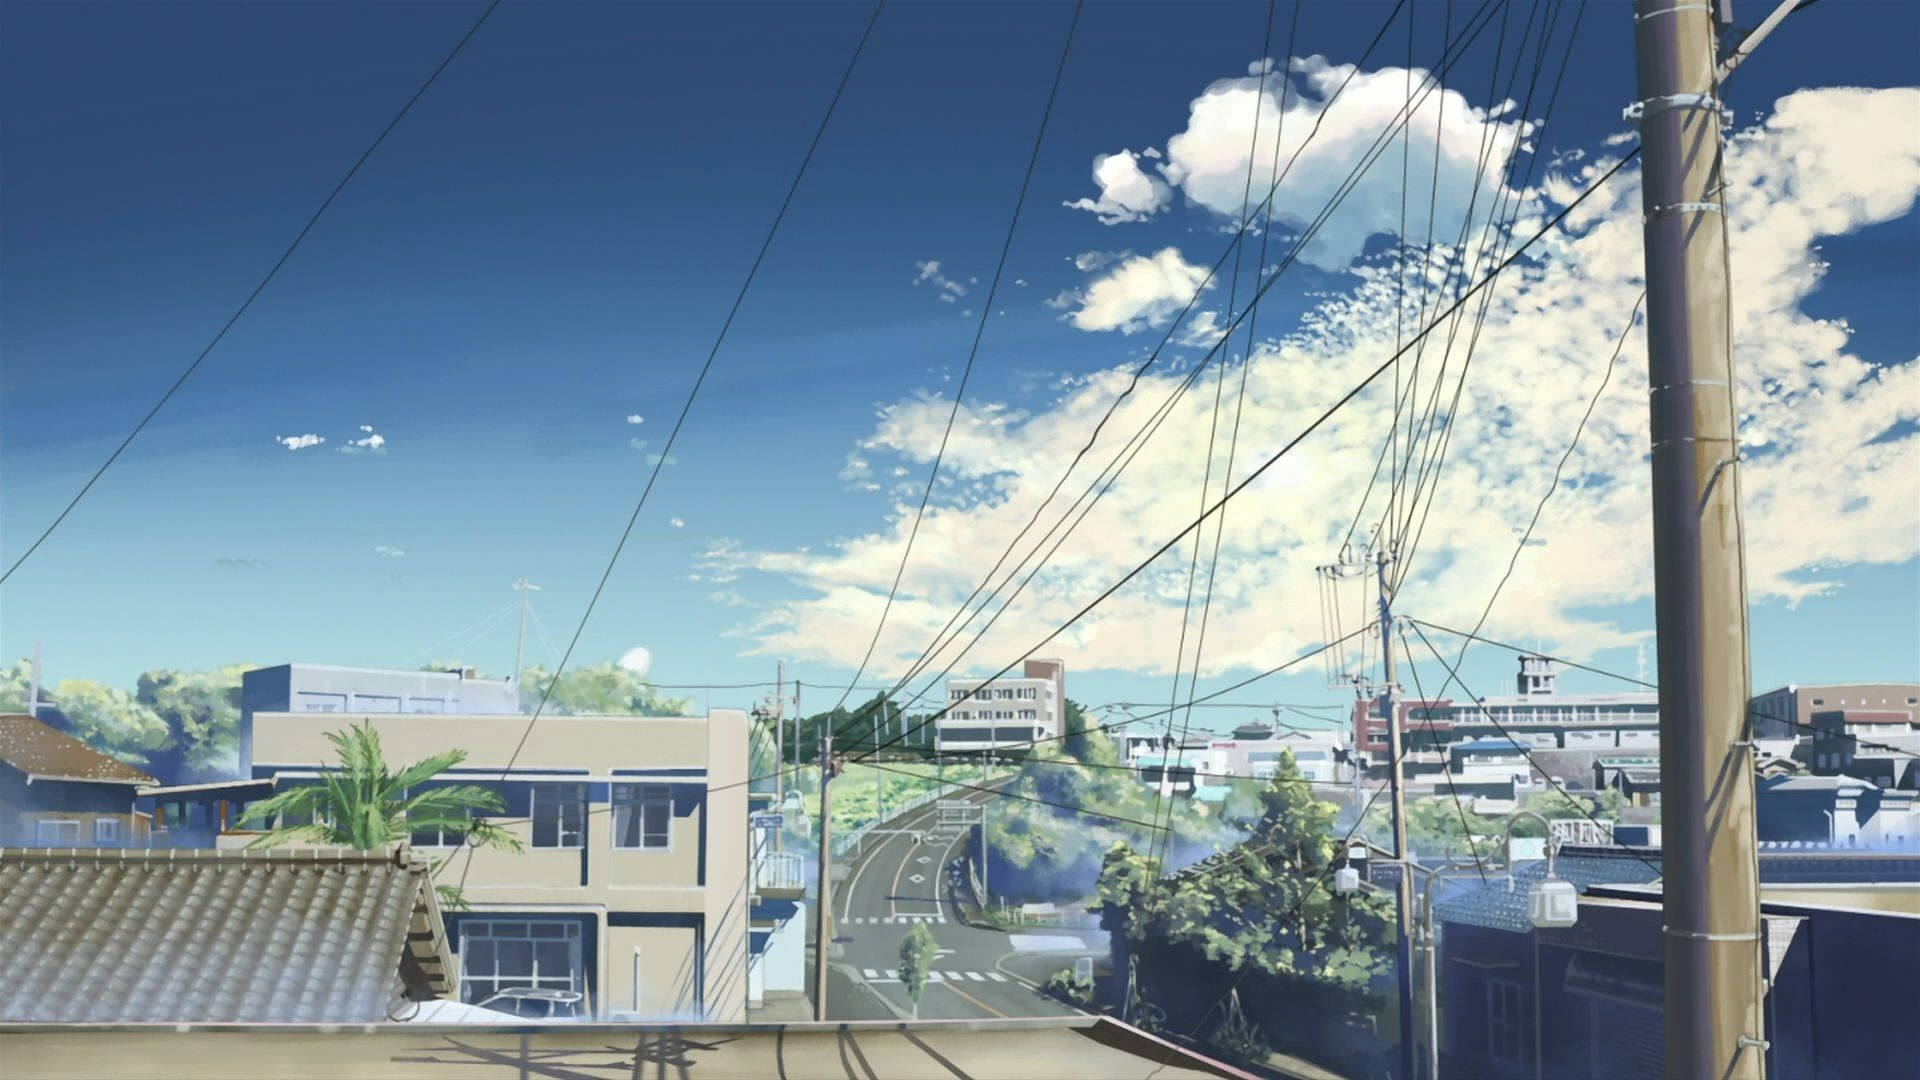 Blue Anime Street Electric Post Aesthetic Background